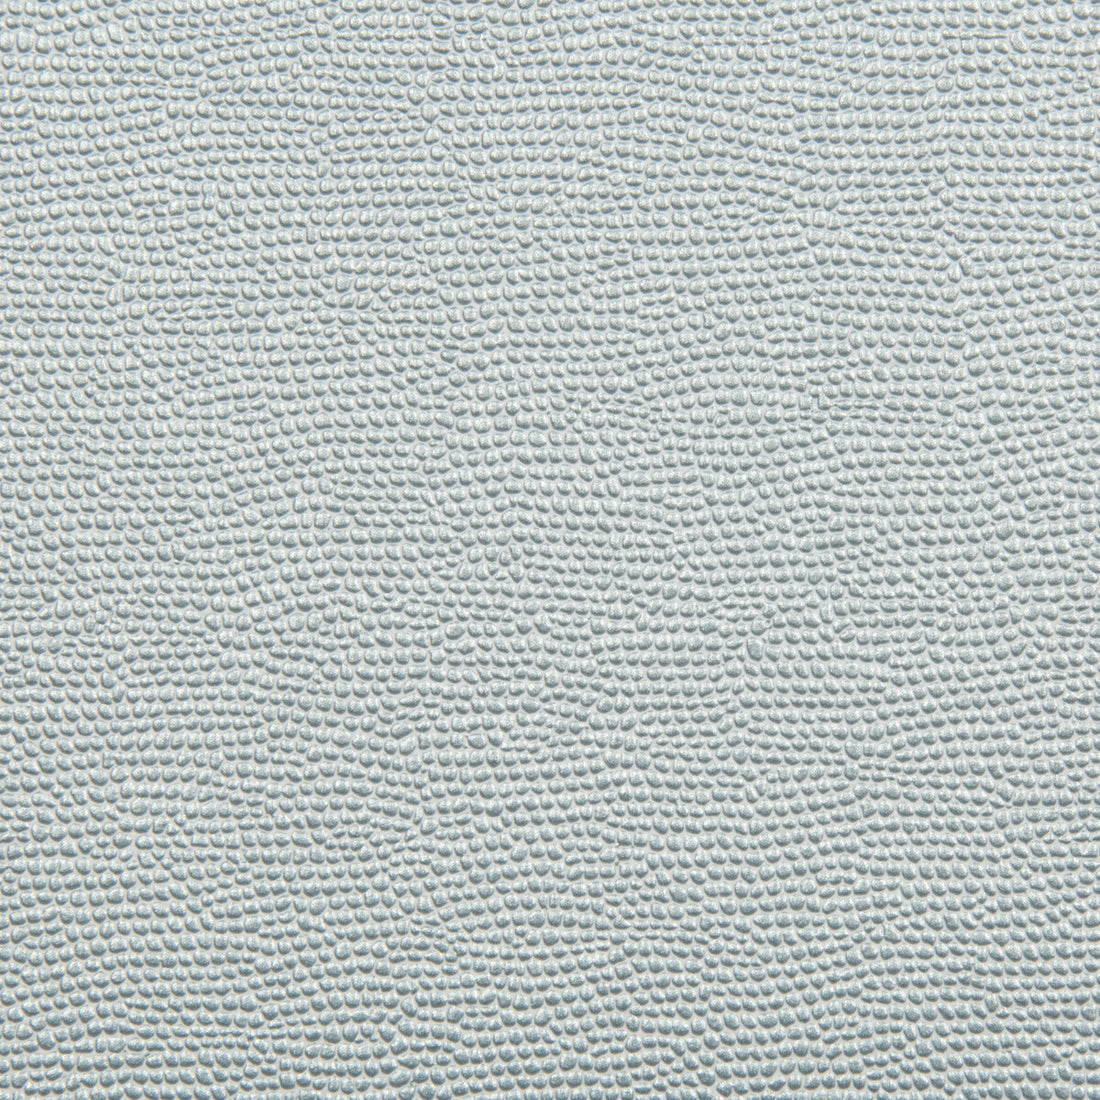 Spartan fabric in iceberg color - pattern SPARTAN.15.0 - by Kravet Contract in the Faux Leather Extreme Performance collection